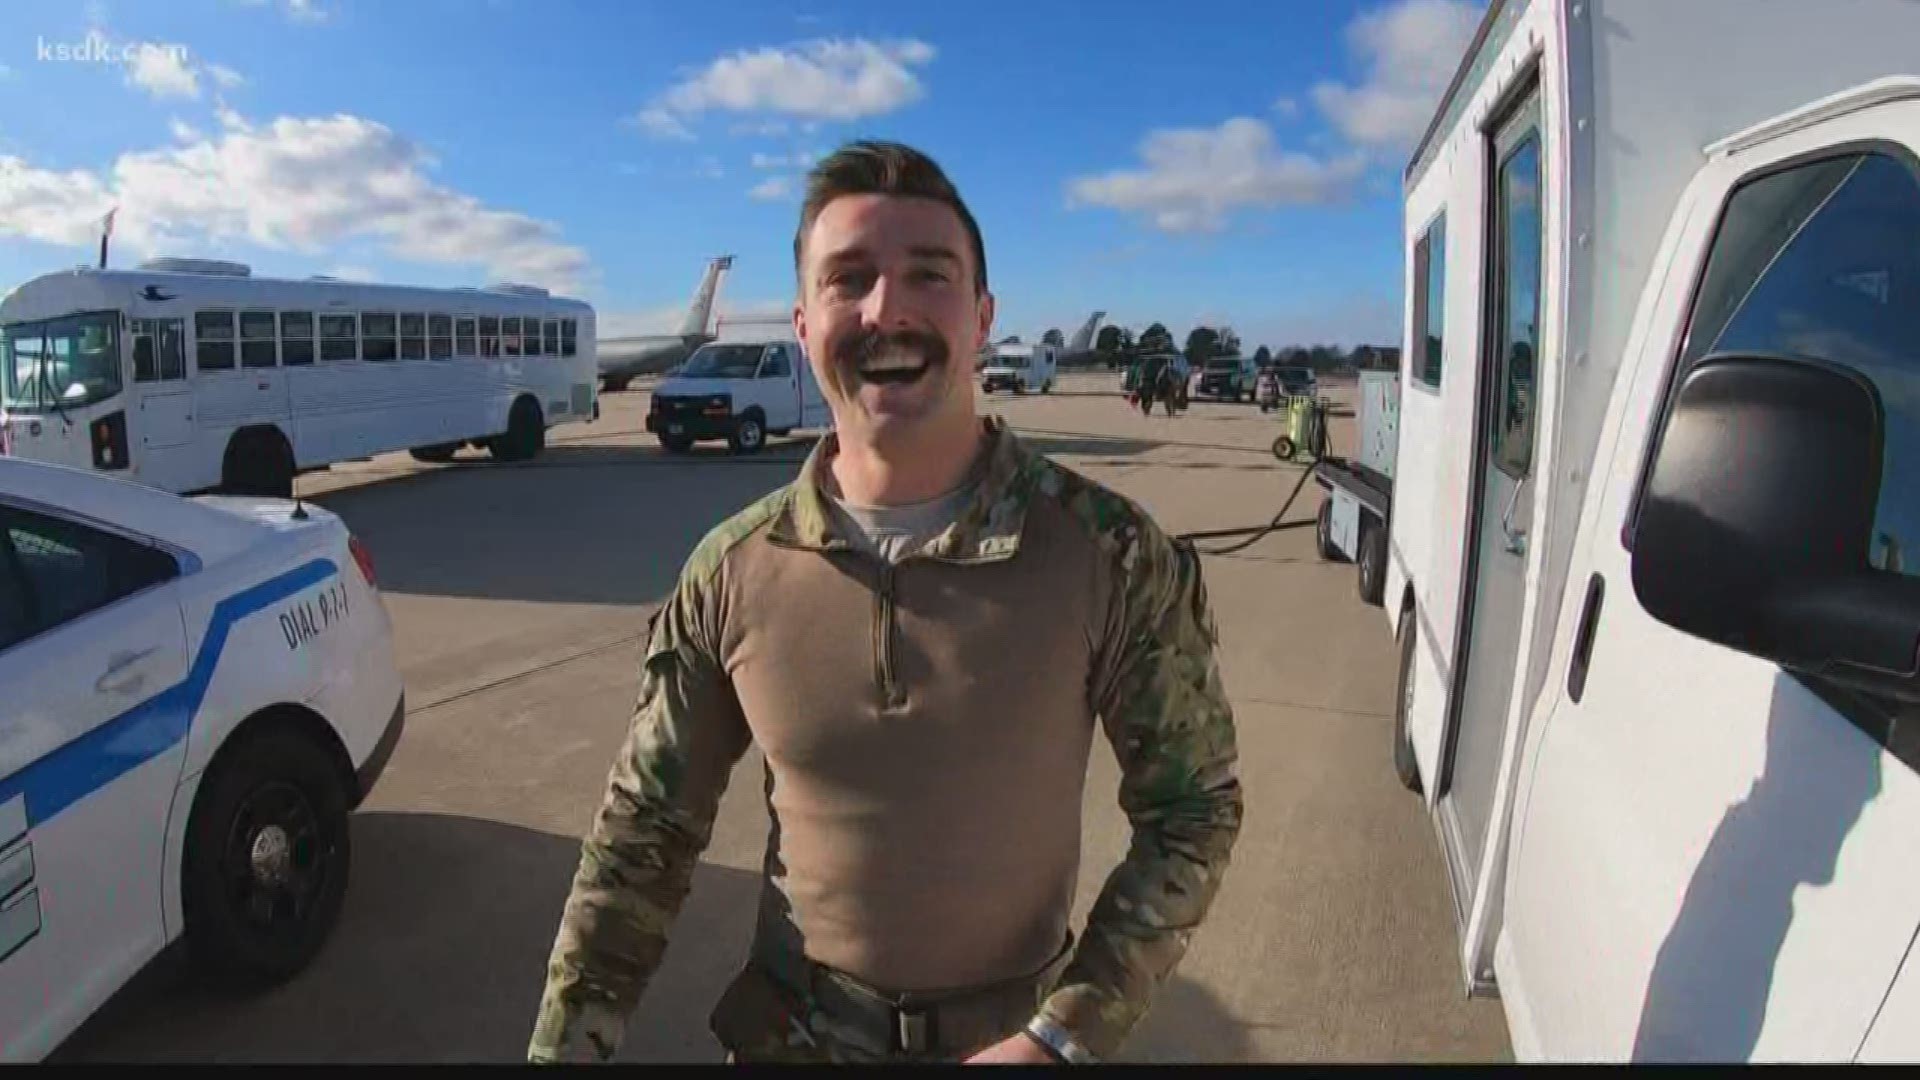 After Brandon stepped off the plane and hugged his whole family, his mother had some thoughts about the woolly mustache Brandon grew during his deployment.